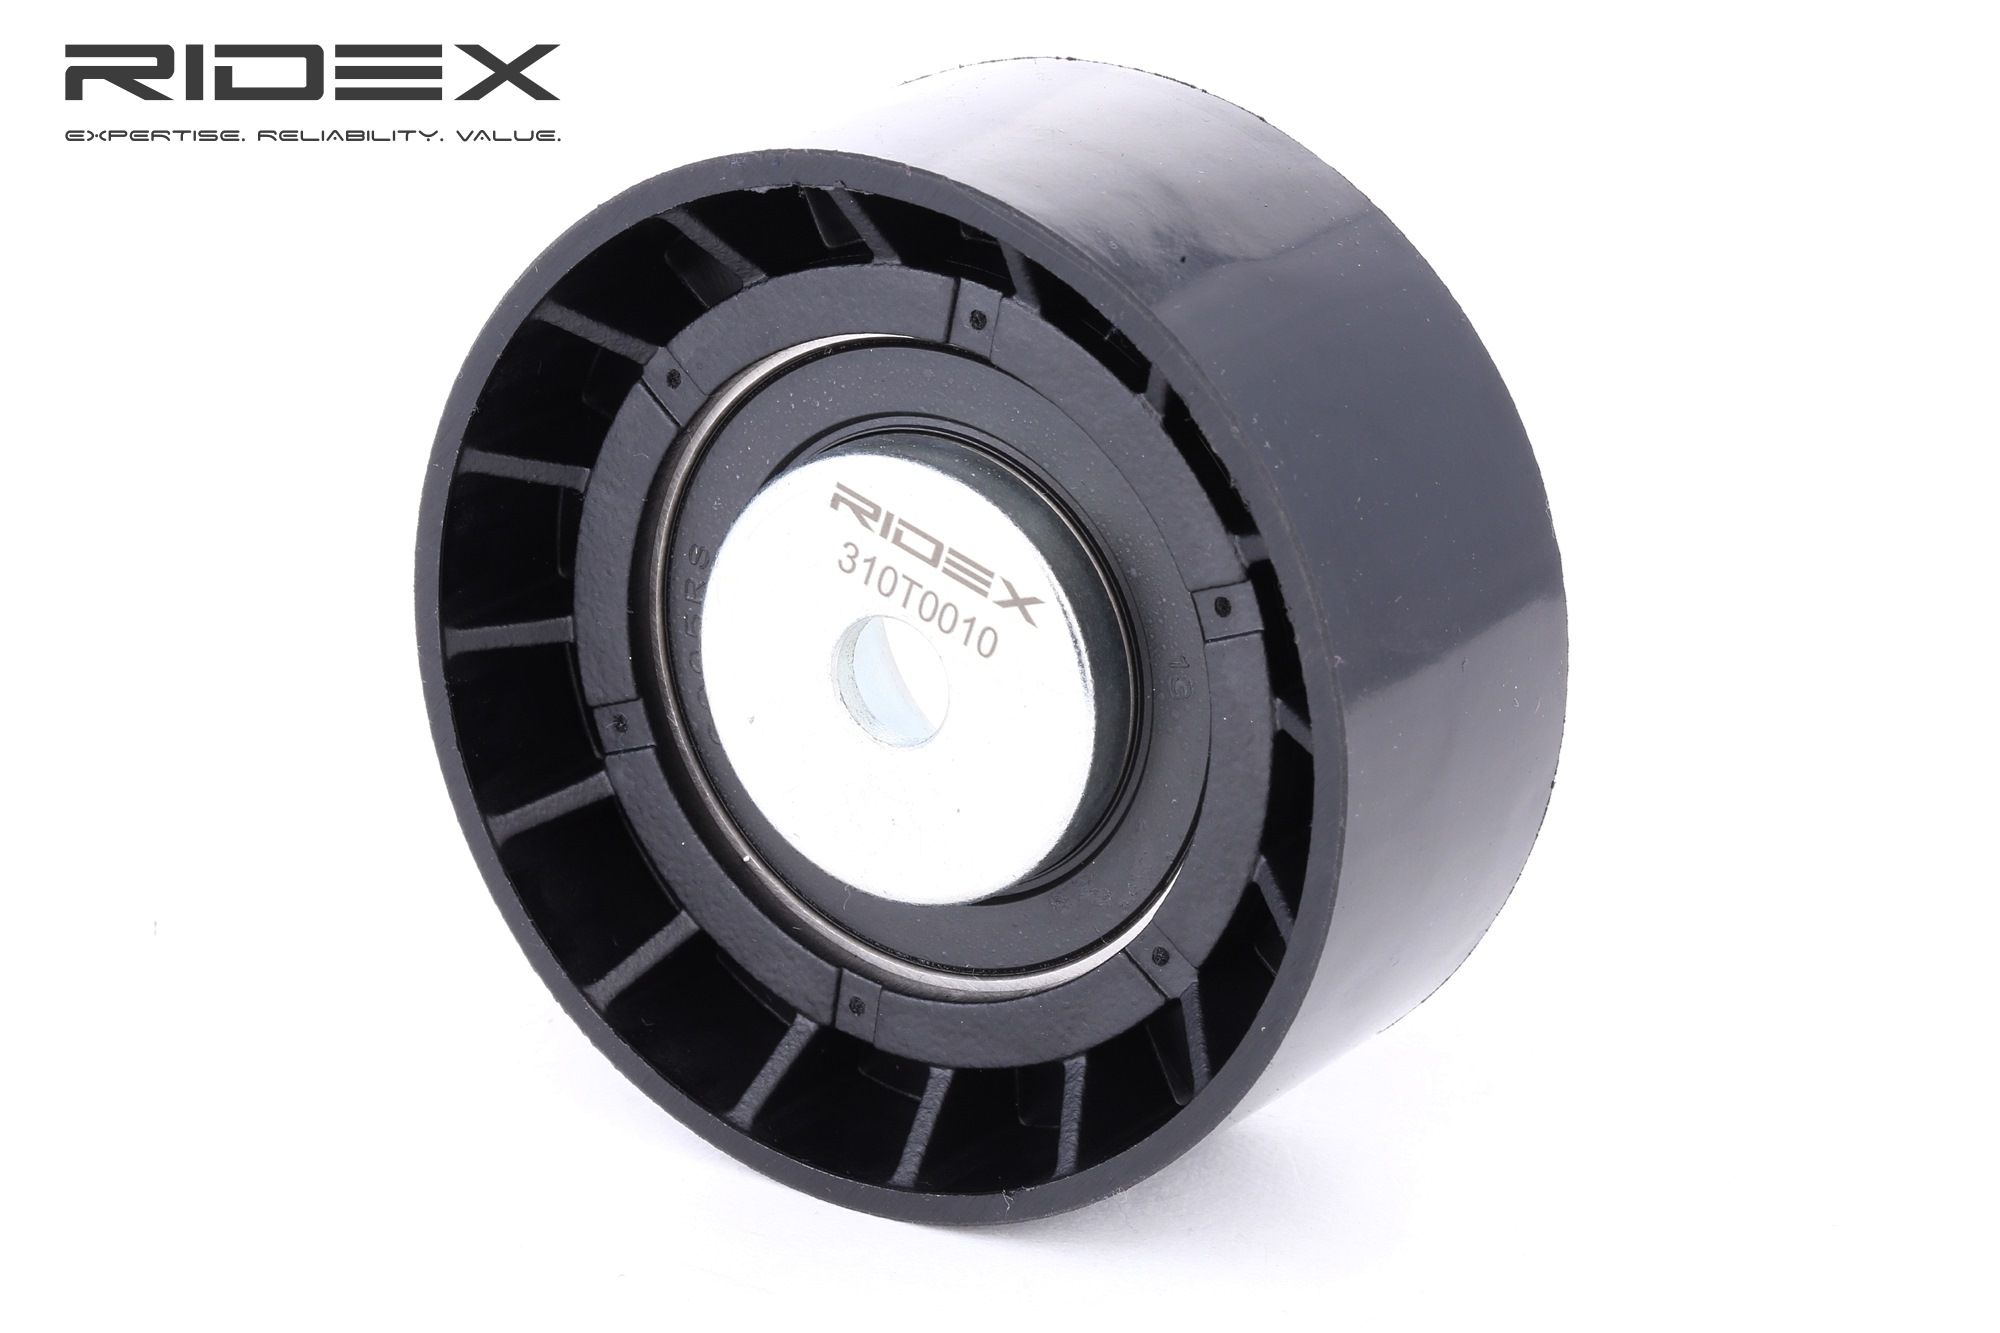 RIDEX 310T0010 Tensioner pulley BMW experience and price